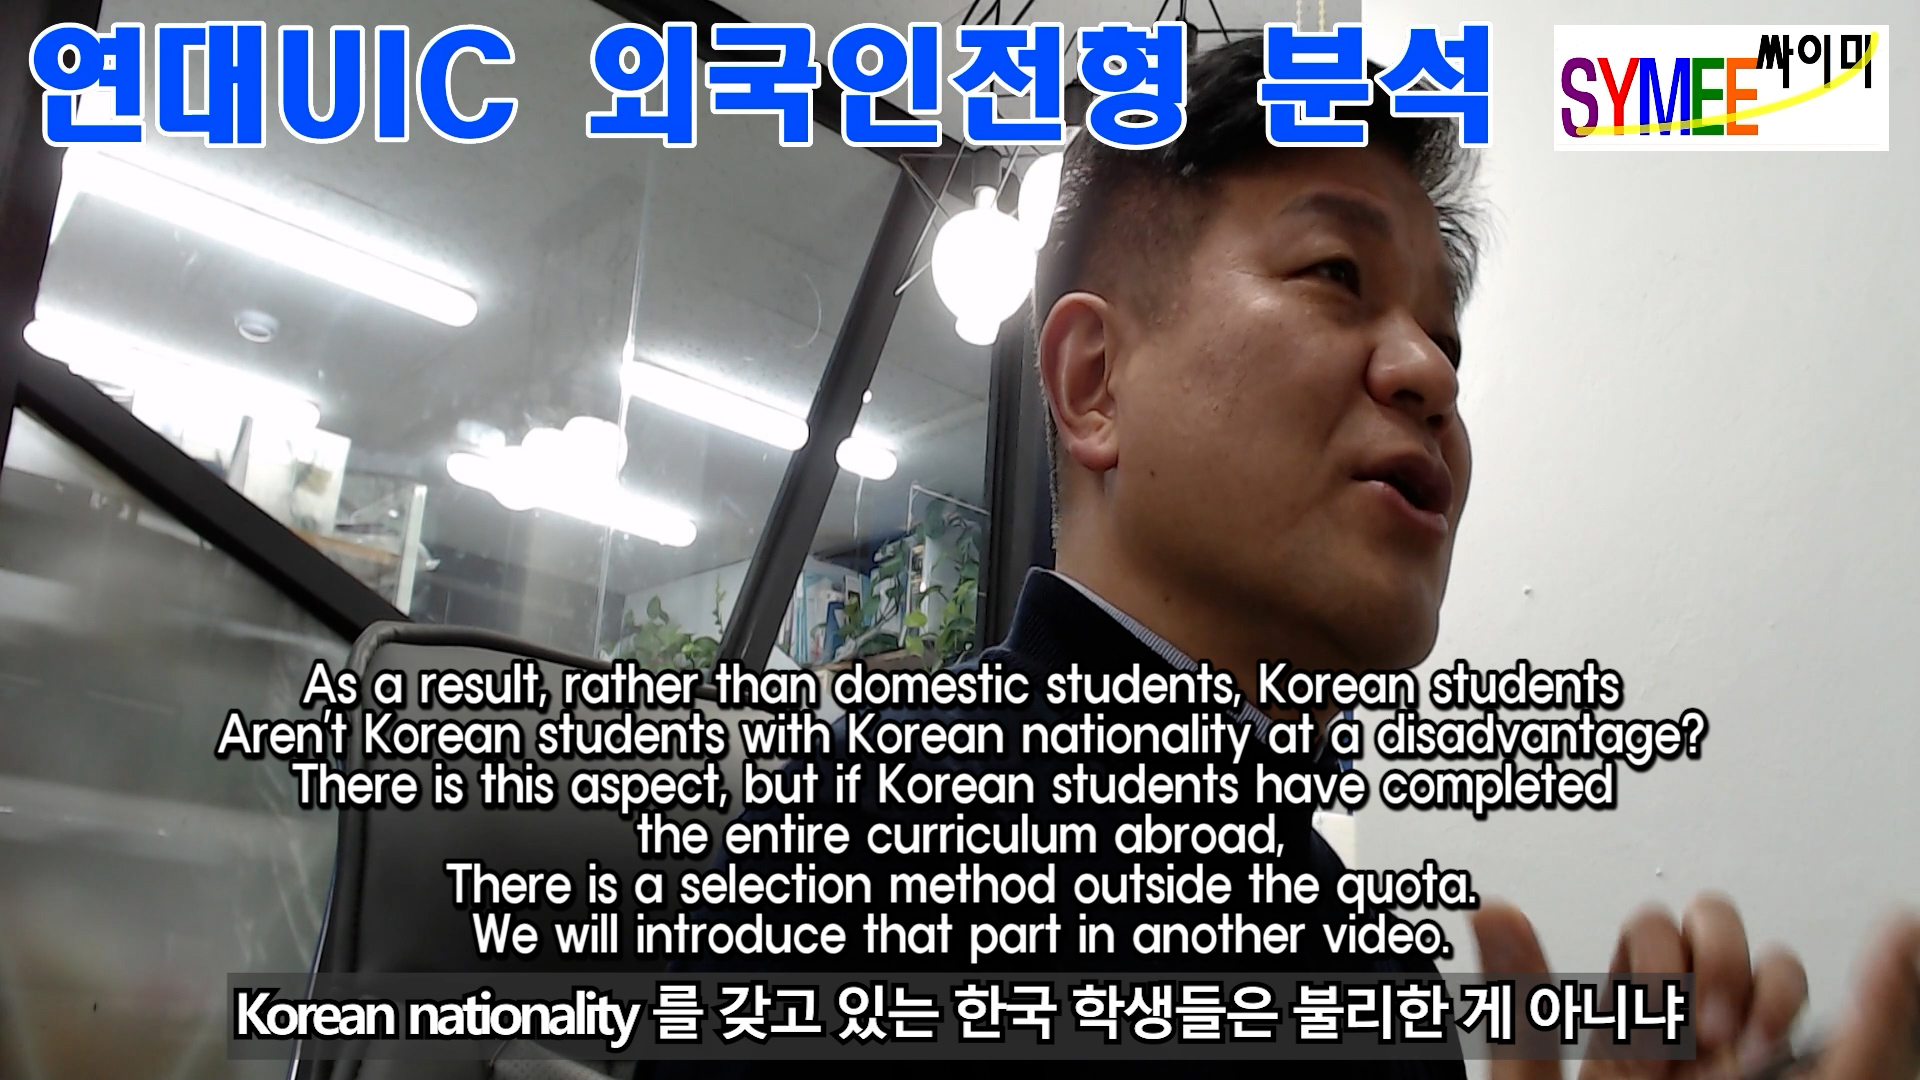 Yonsei Univ. Admission for UIC for Foreign Student 02 Qualifications.00_02_26_50.스틸 006.jpg